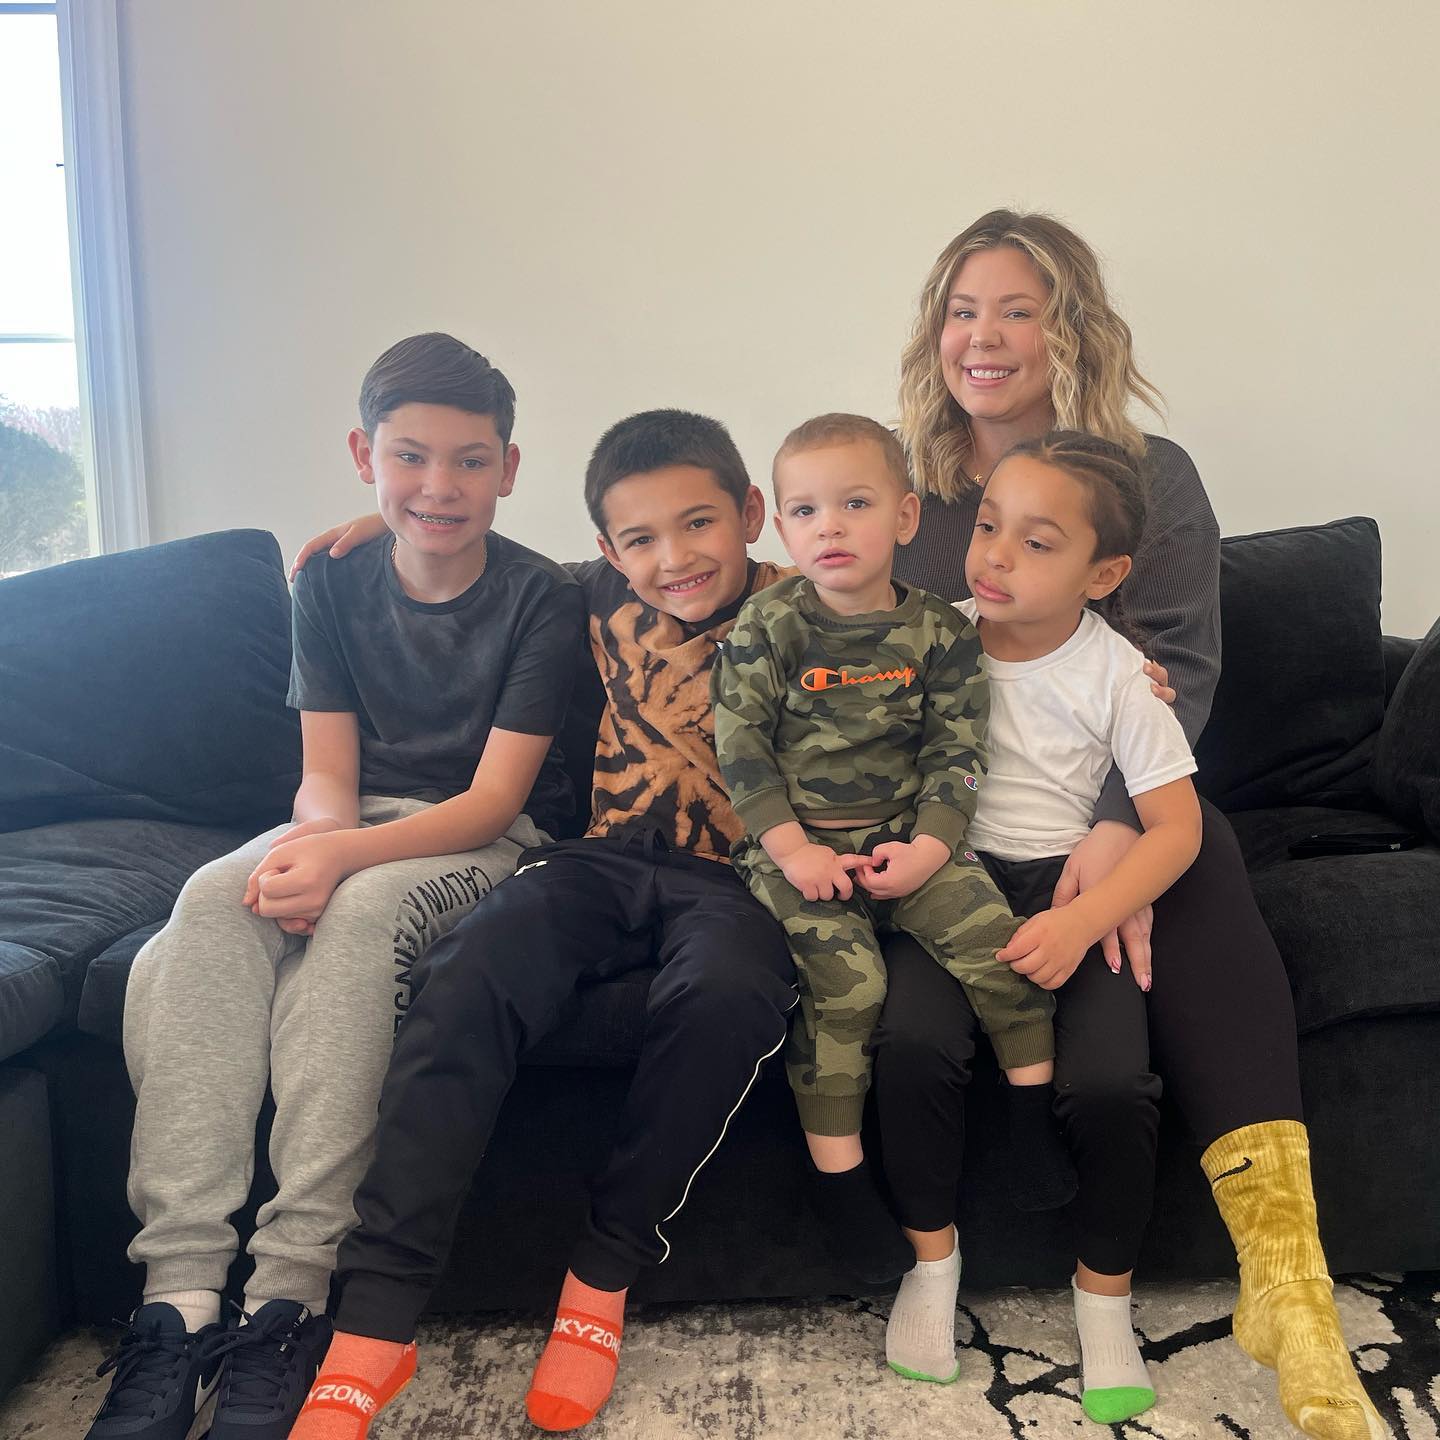 Before Rio, Kailyn already had four sons from different relationships